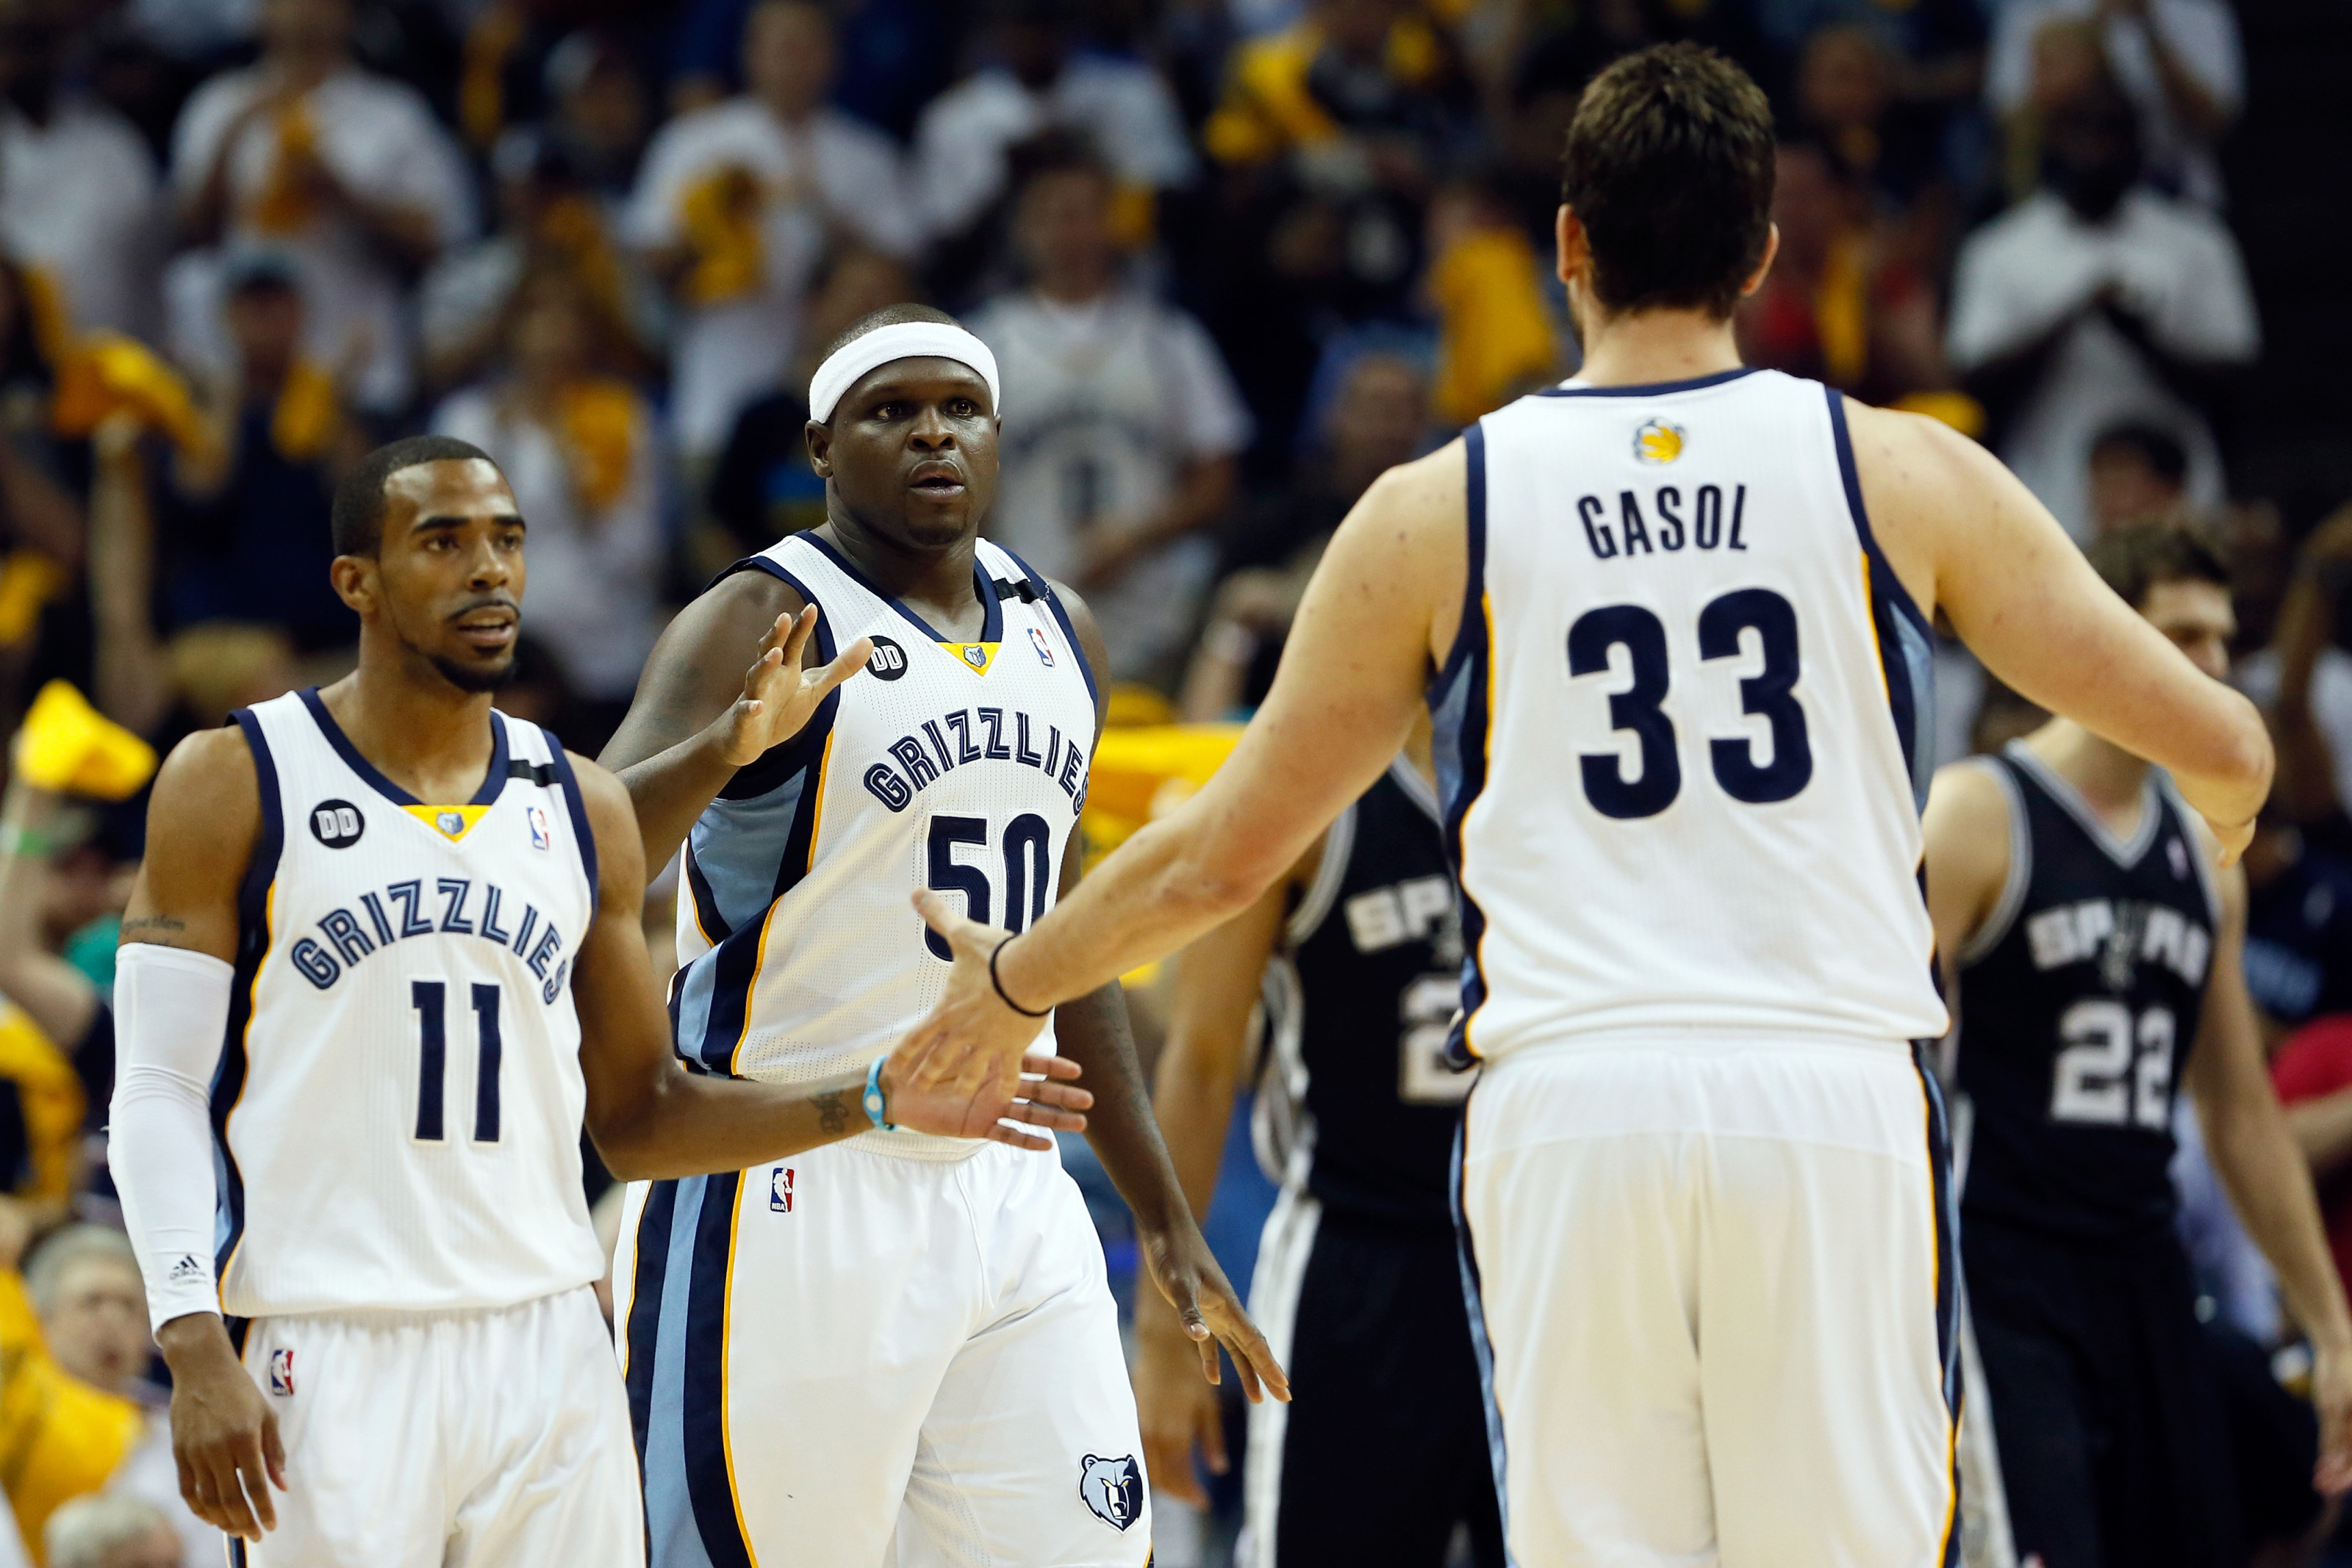 Sparty Standout Zach Randolph Is The First Memphis Grizzlies Retired Jersey